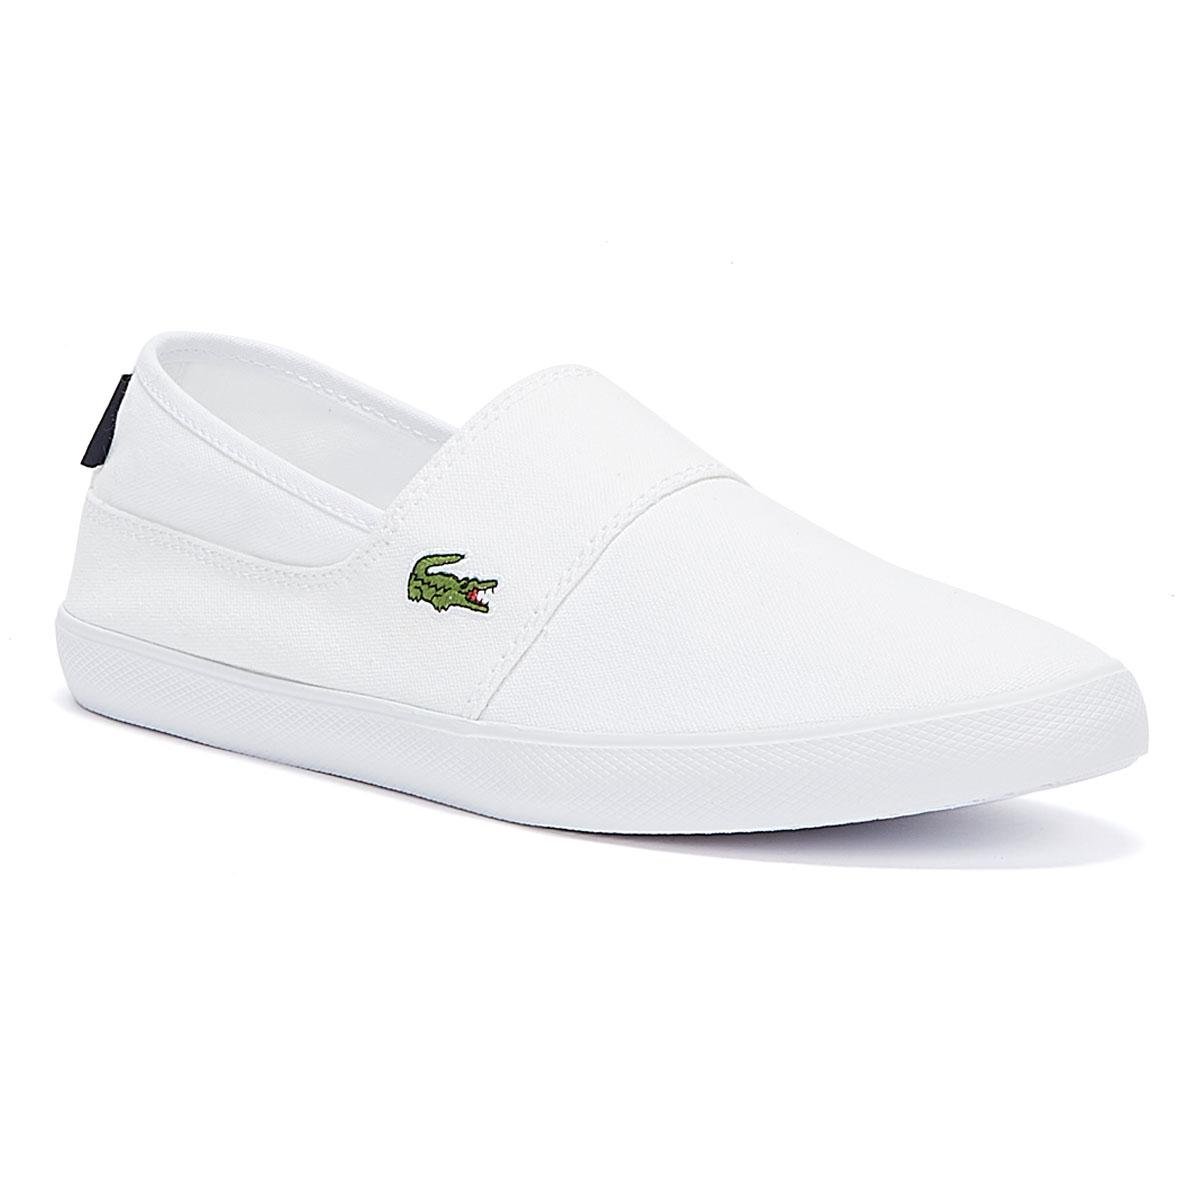 Lacoste Marice Shoes in White Canvas.jpeg